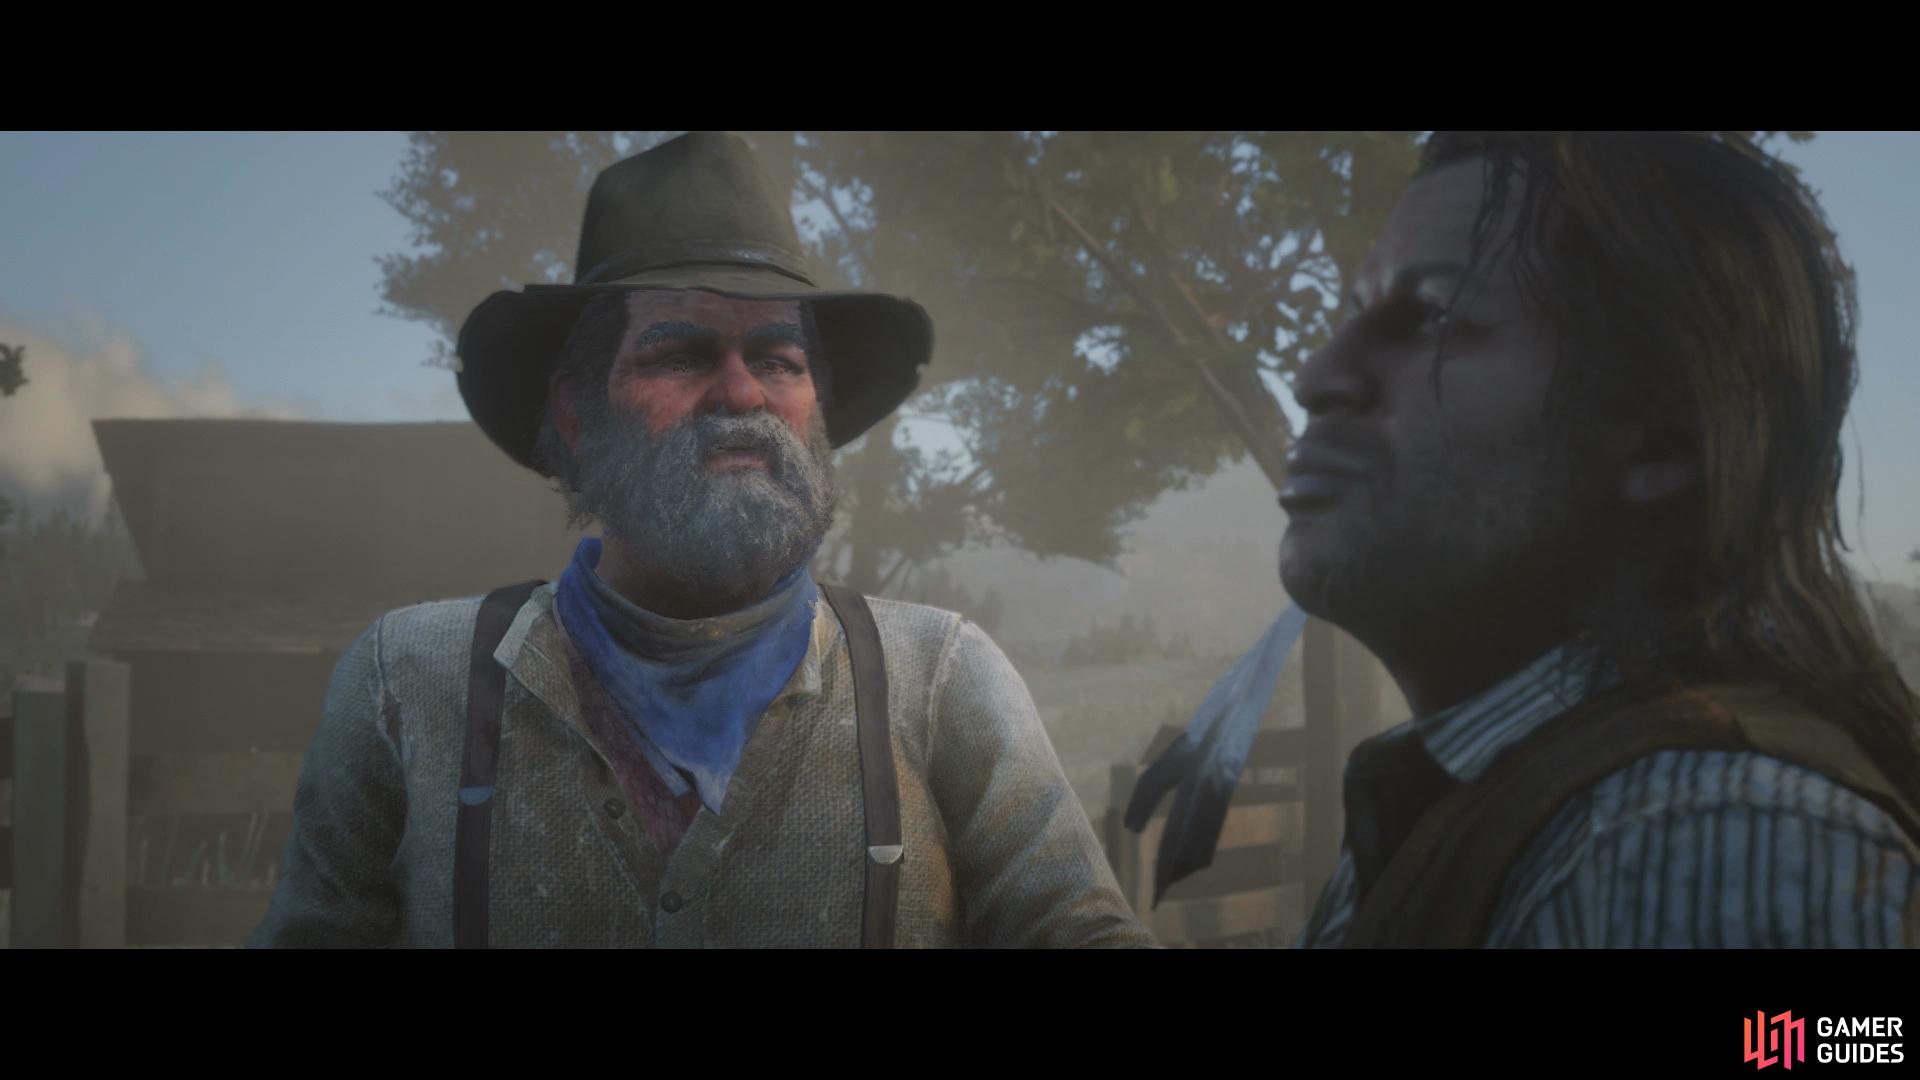 Uncle's Bad Day - Epilogue - Part 2 - | Red Dead Redemption 2 | Guides®